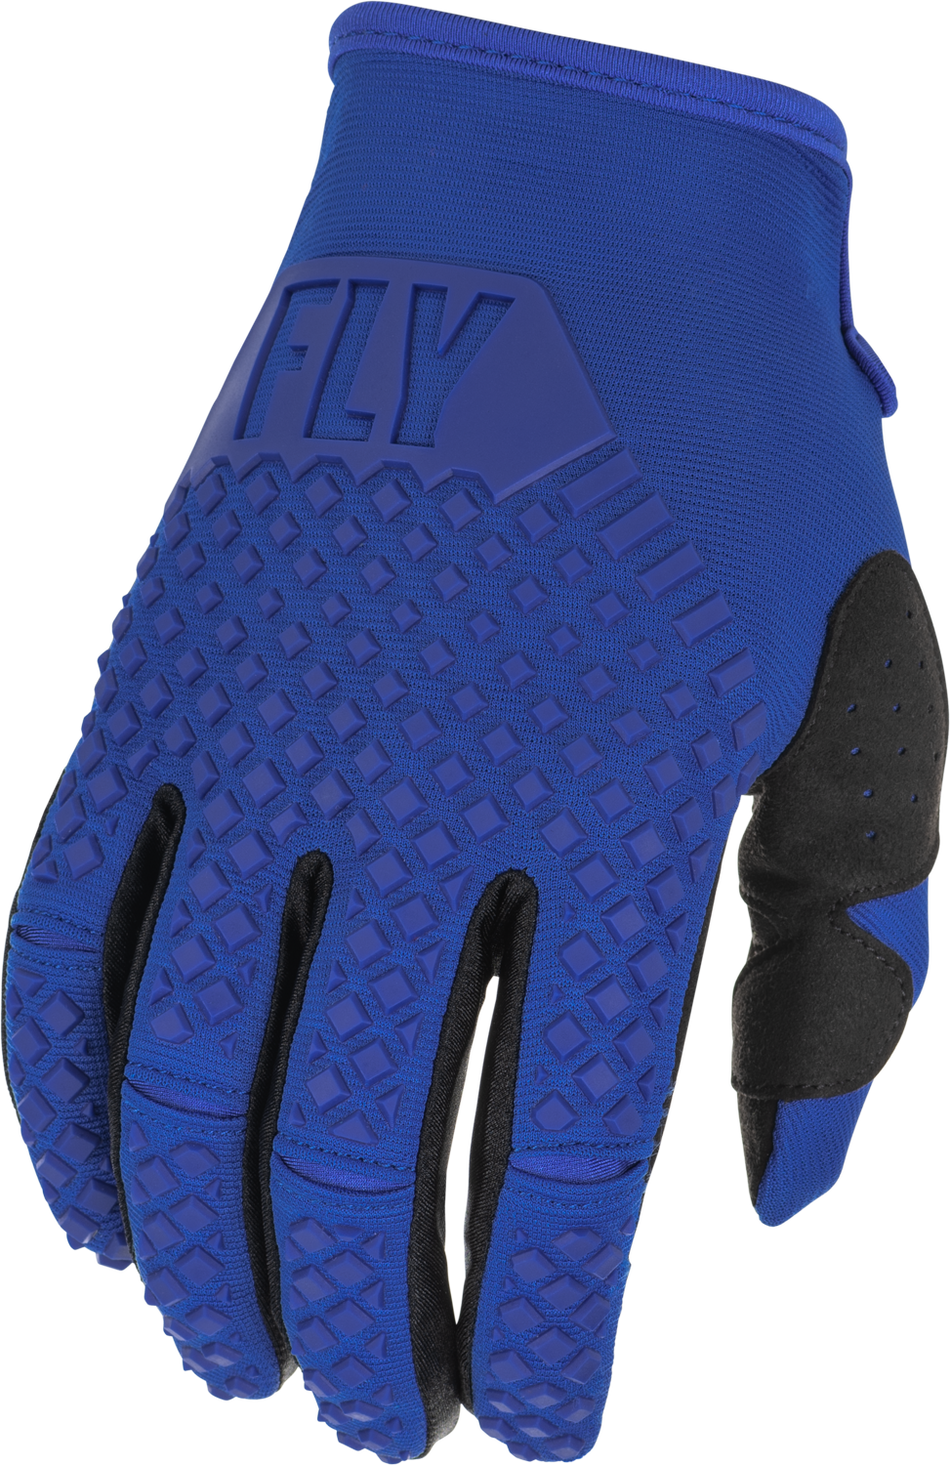 FLY RACING Kinetic Gloves Blue 3x 375-4113X